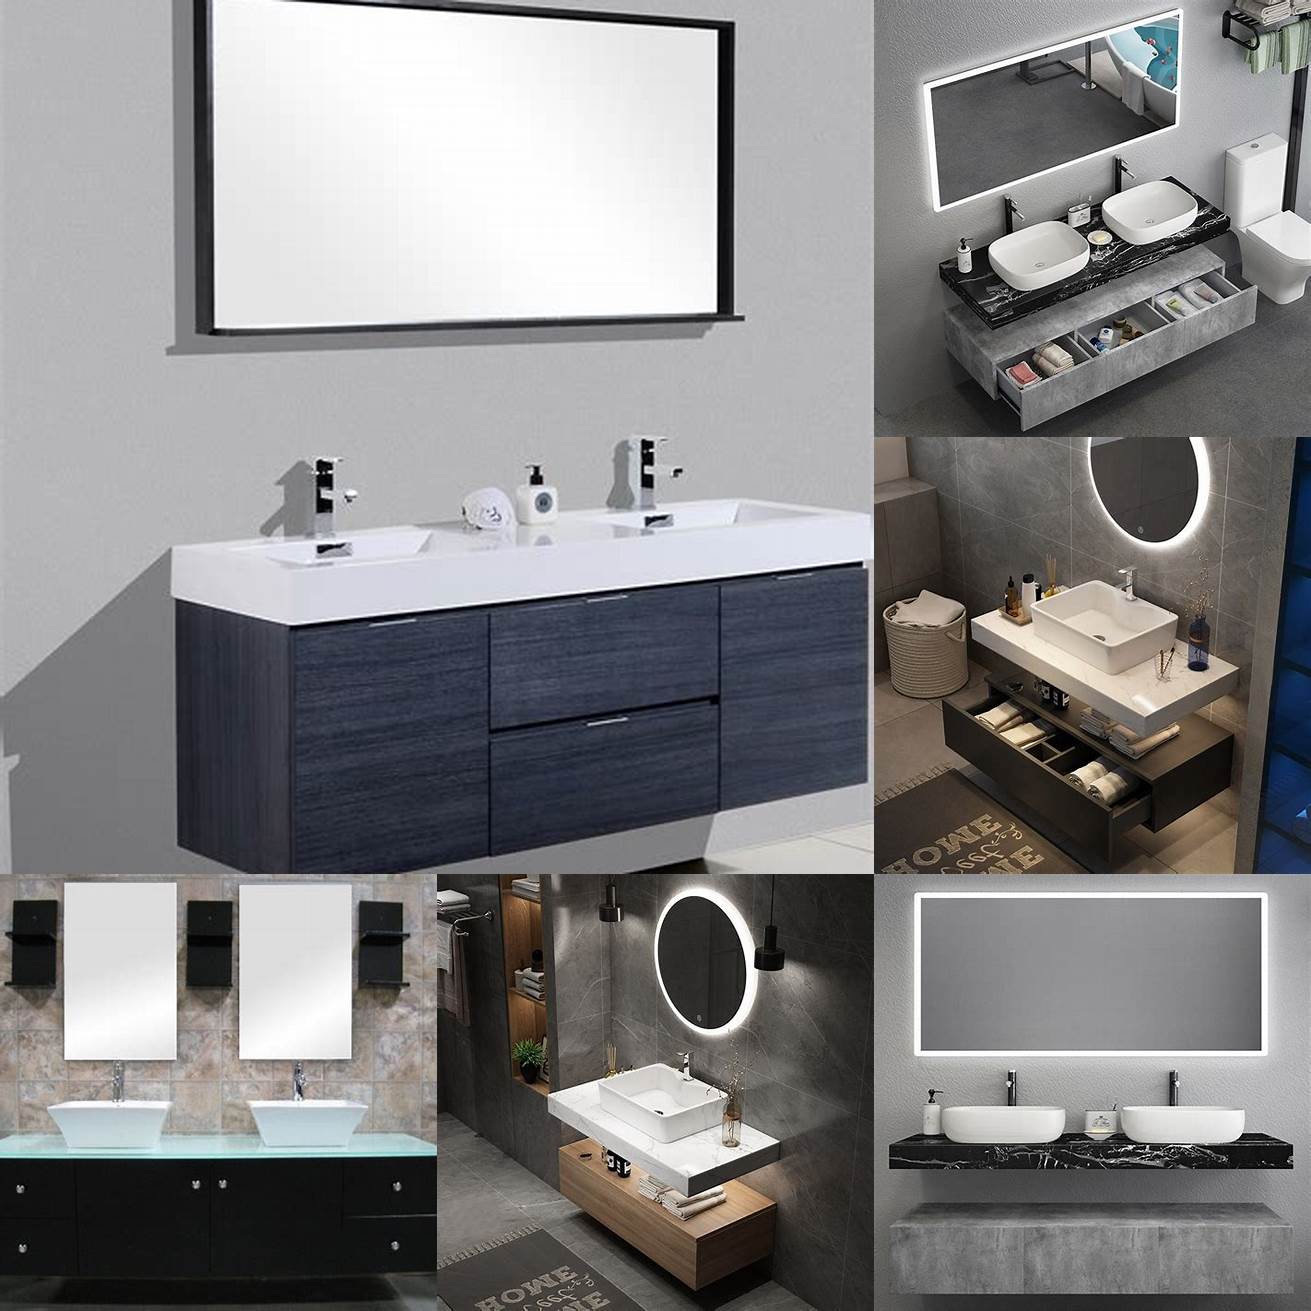 2 Modern wall-mounted vanity with a vessel sink